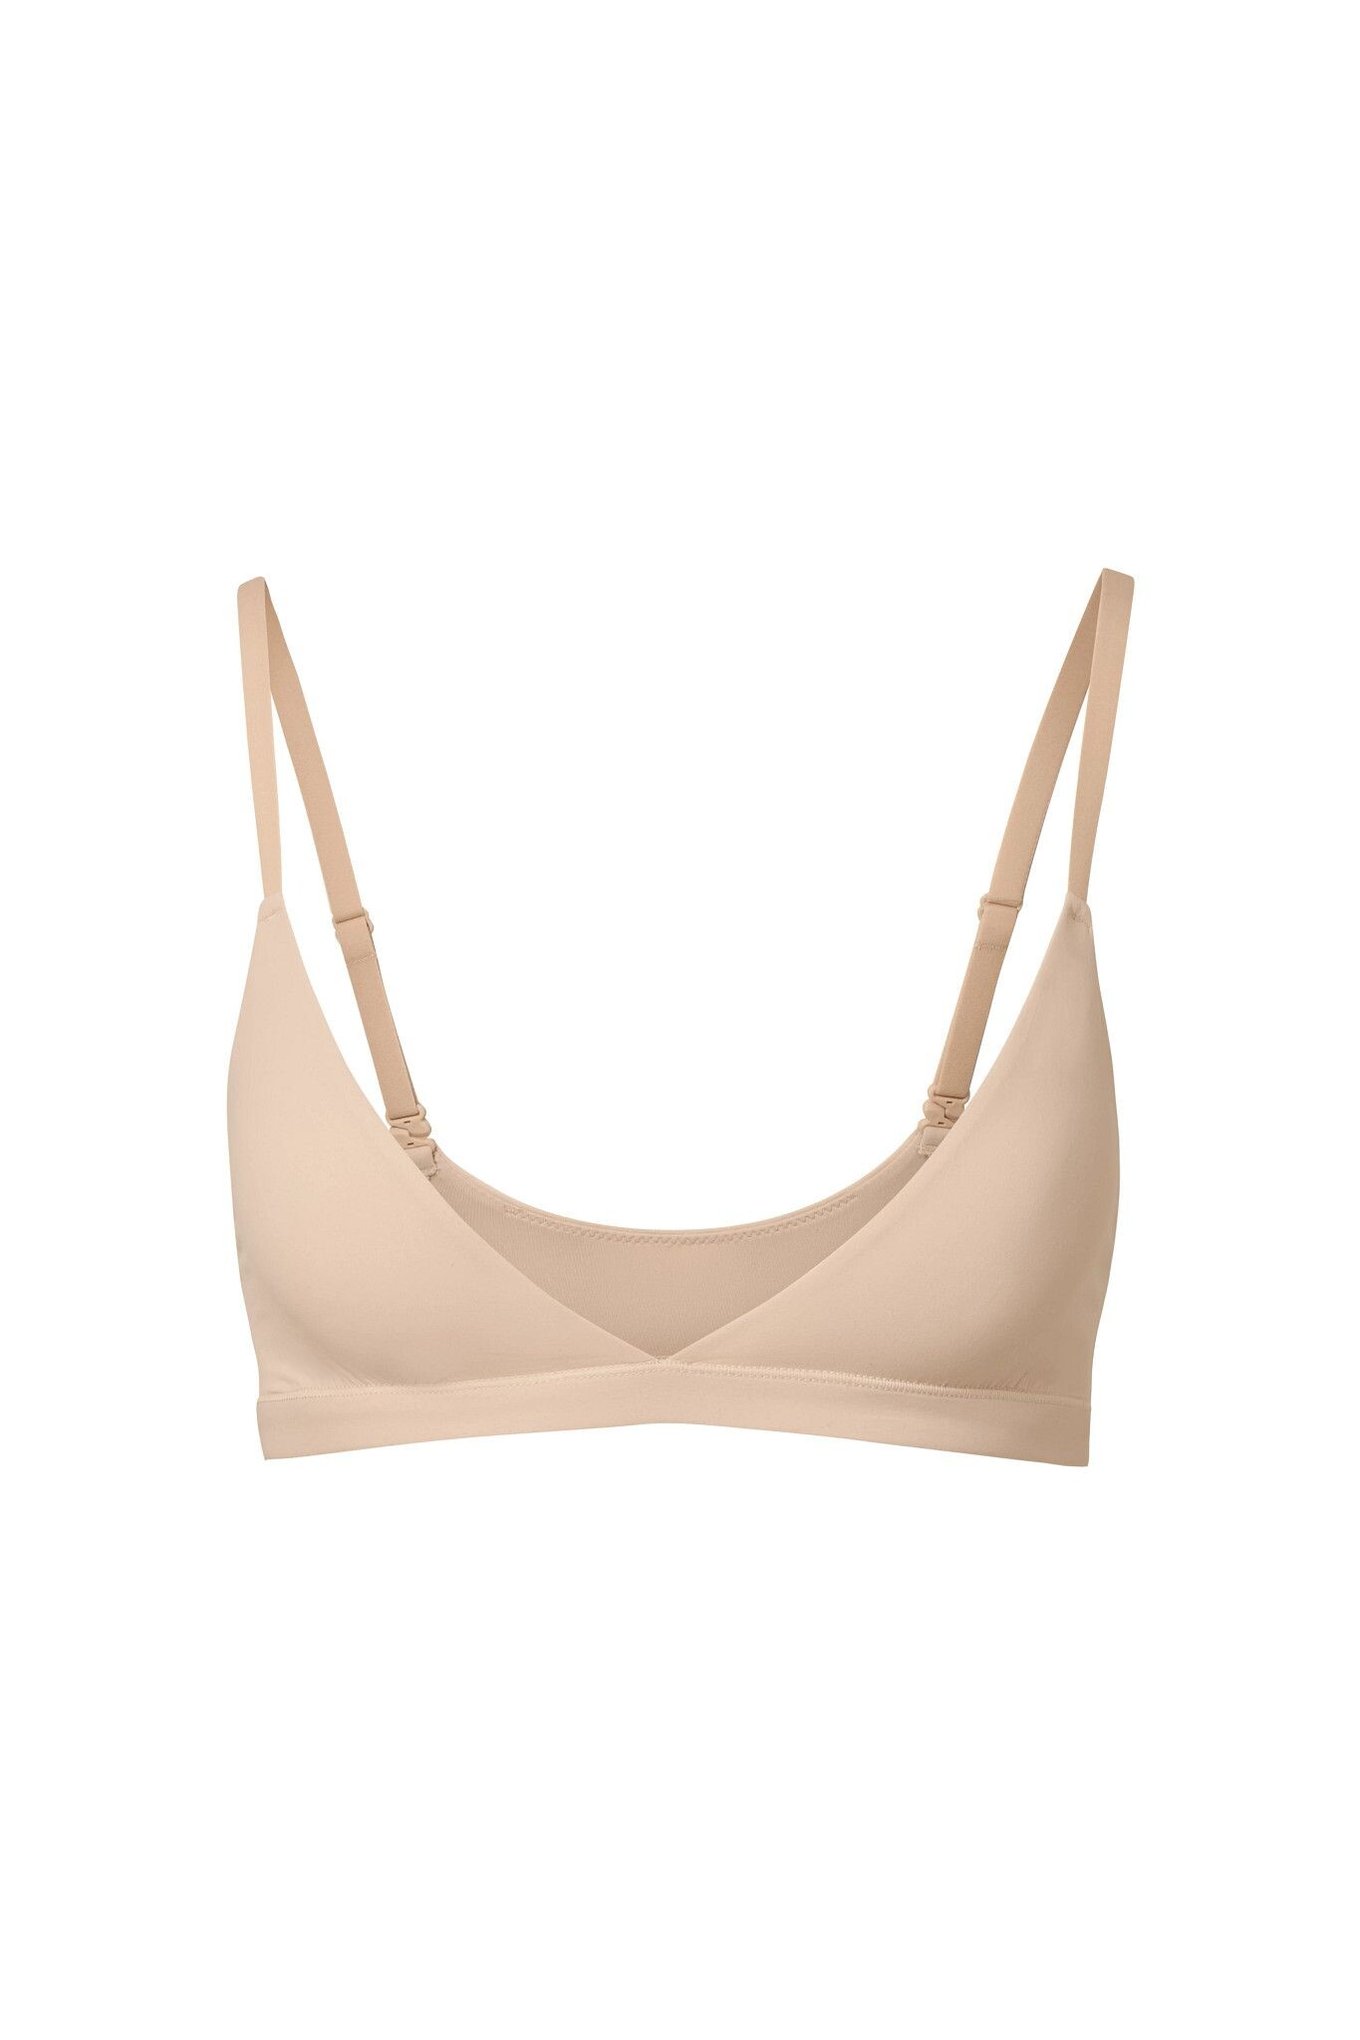 Everyday Essential Wired Push Up Bra 01 in Smooth Skin